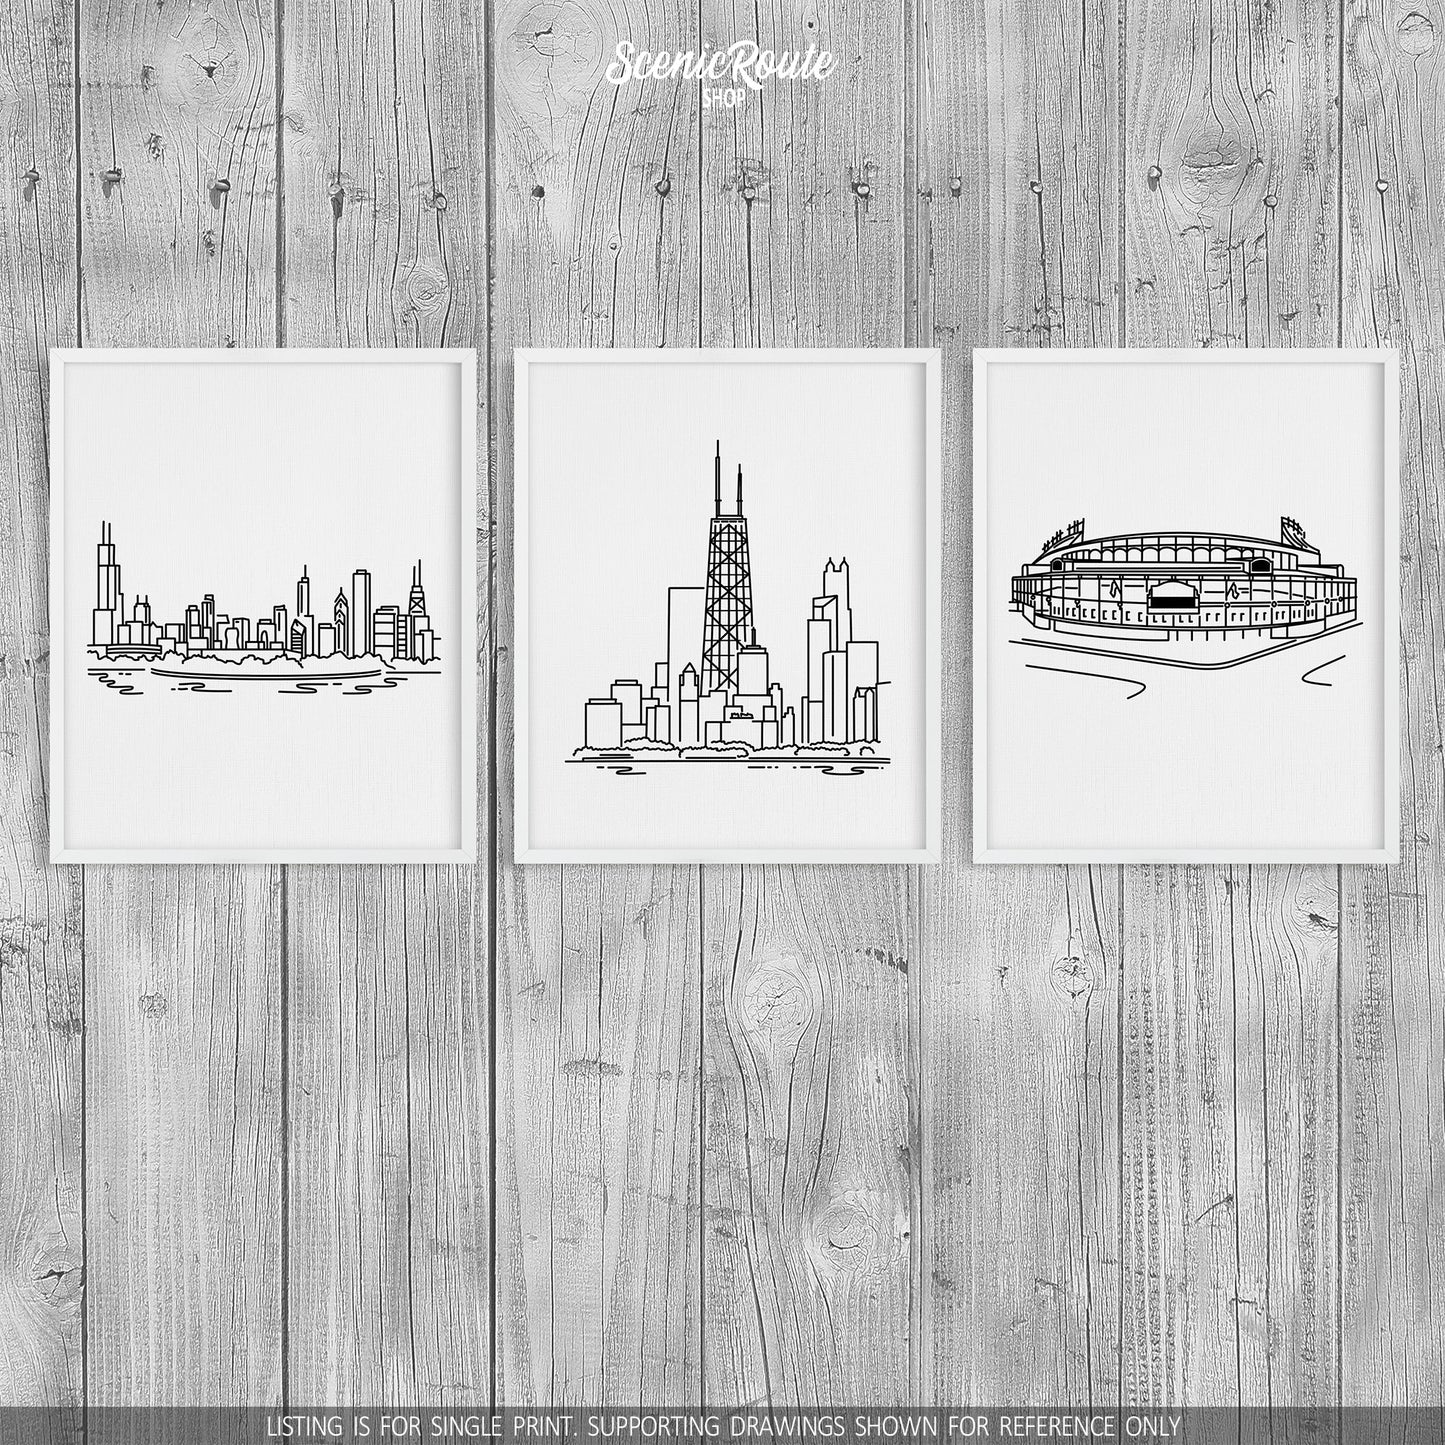 A group of three framed drawings on a wood wall. The line art drawings include the Chicago Skyline, John Hancock Tower, and Wrigley Field